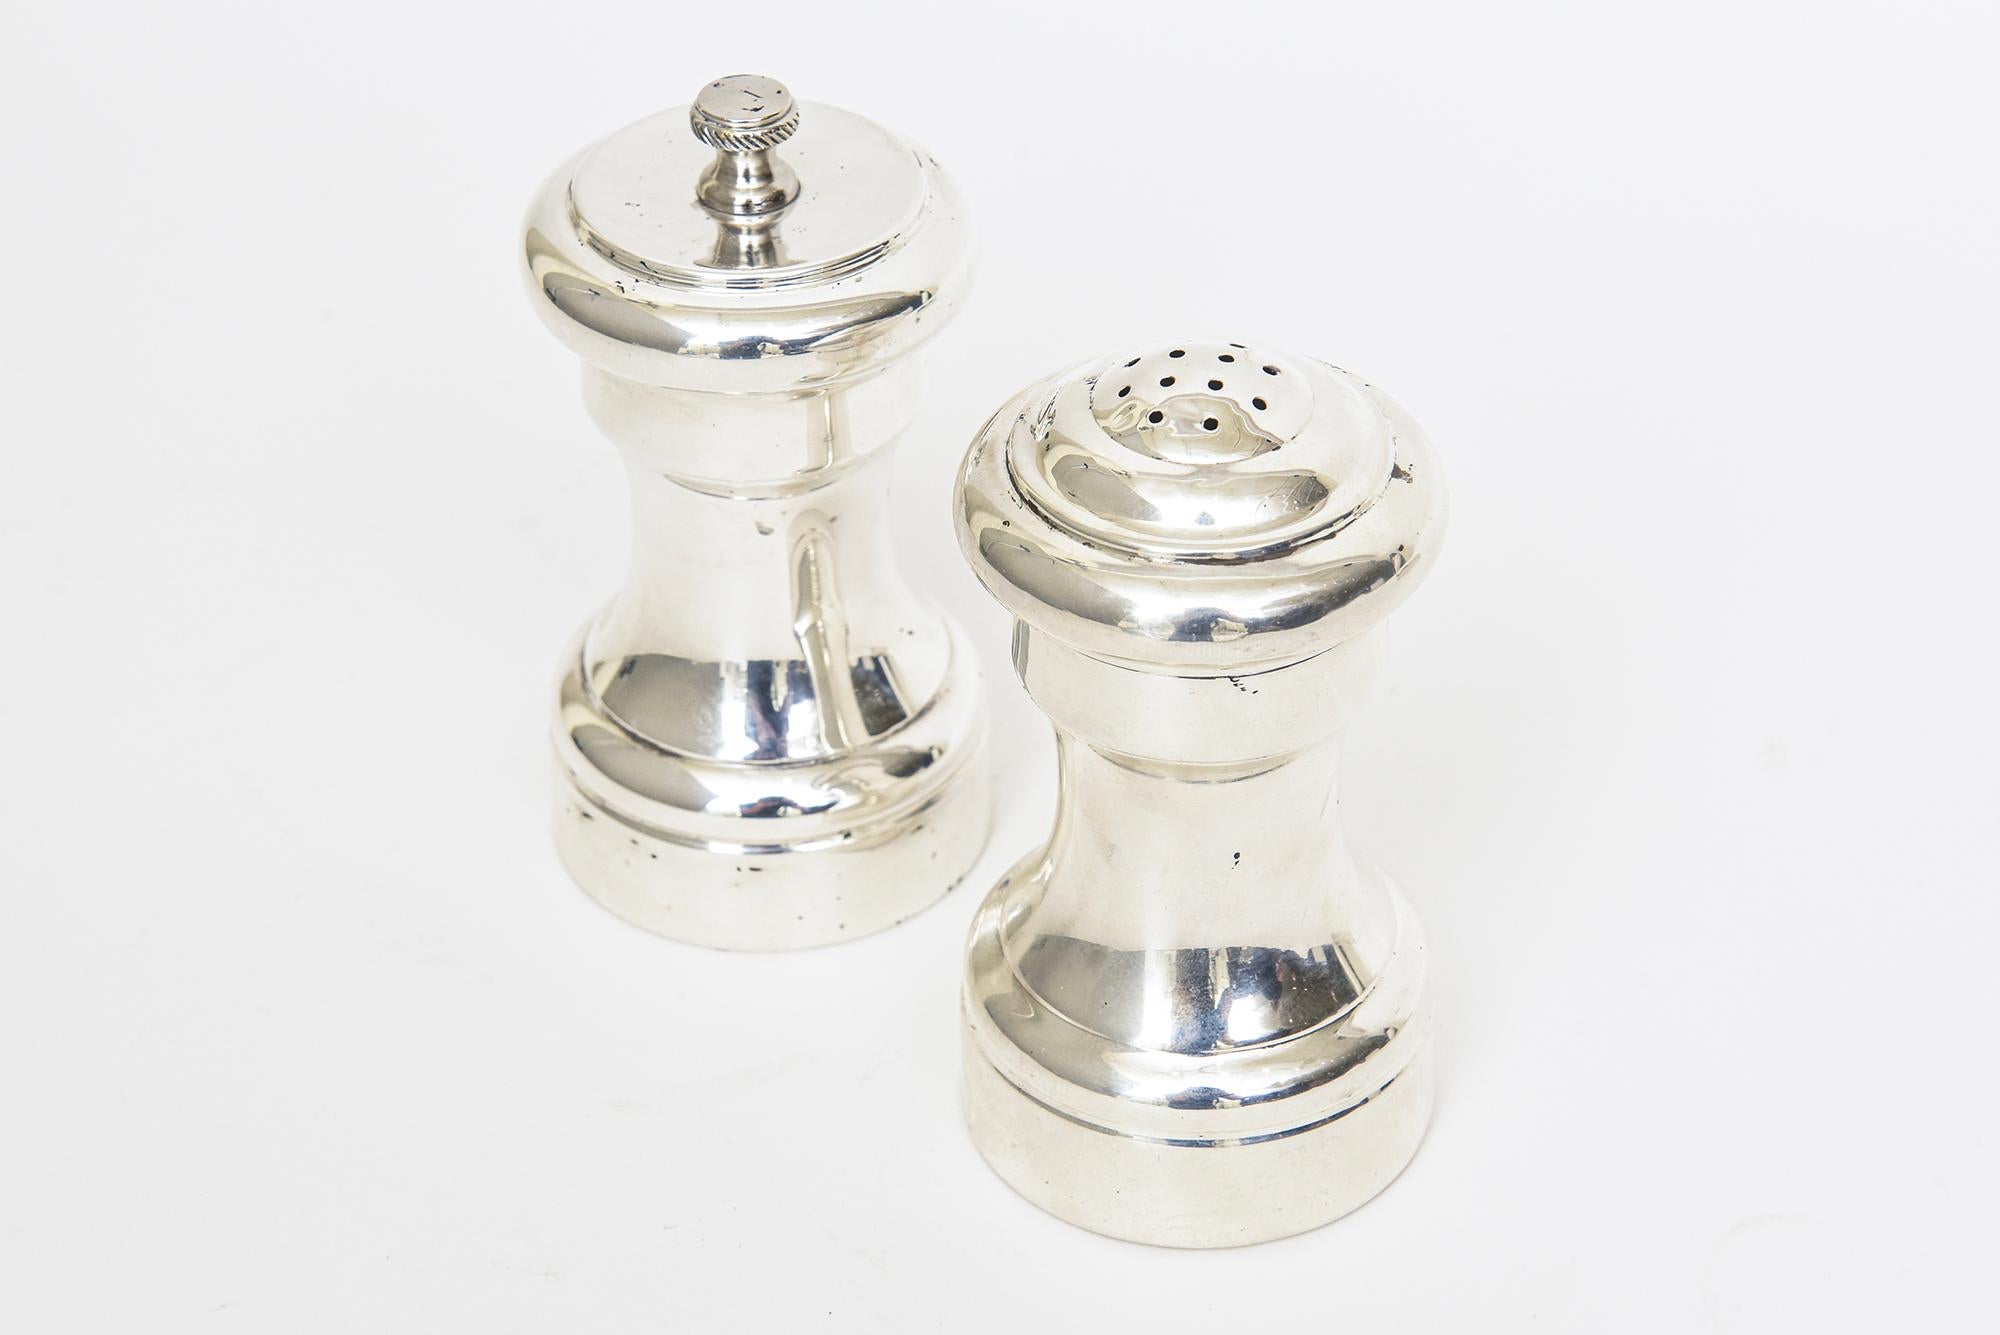 Thee lovely vintage signed Cartier salt and pepper shakers are from the 80's but have a nod to both modern and traditional styles. They are stamped Made In Italy on the base. The pepper mill is 4